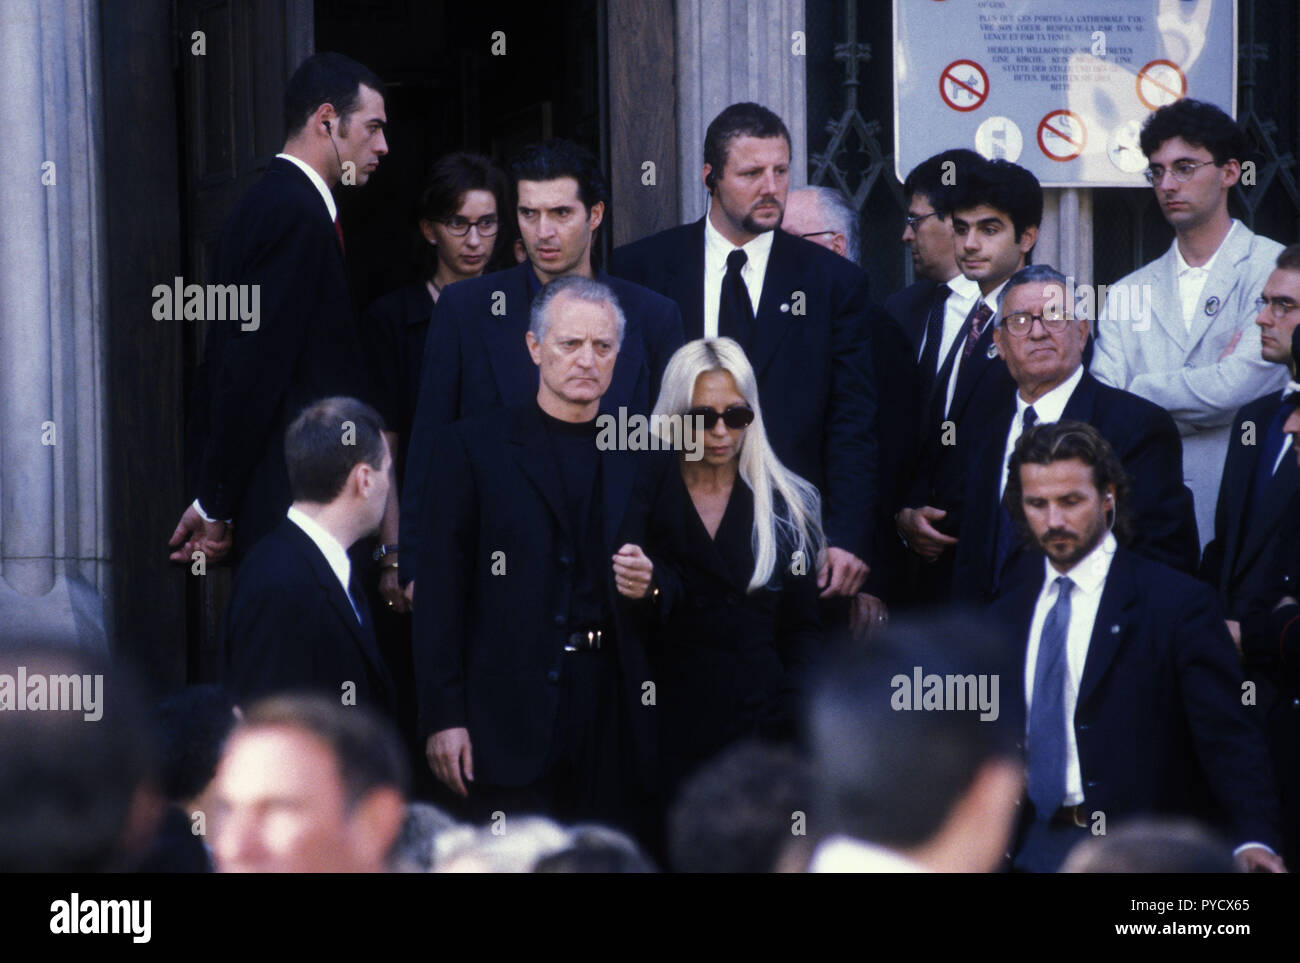 The funeral of Gianni Versace in Milan, Italy on 22 July 1997 Featuring:  Santo Versace, Donatella